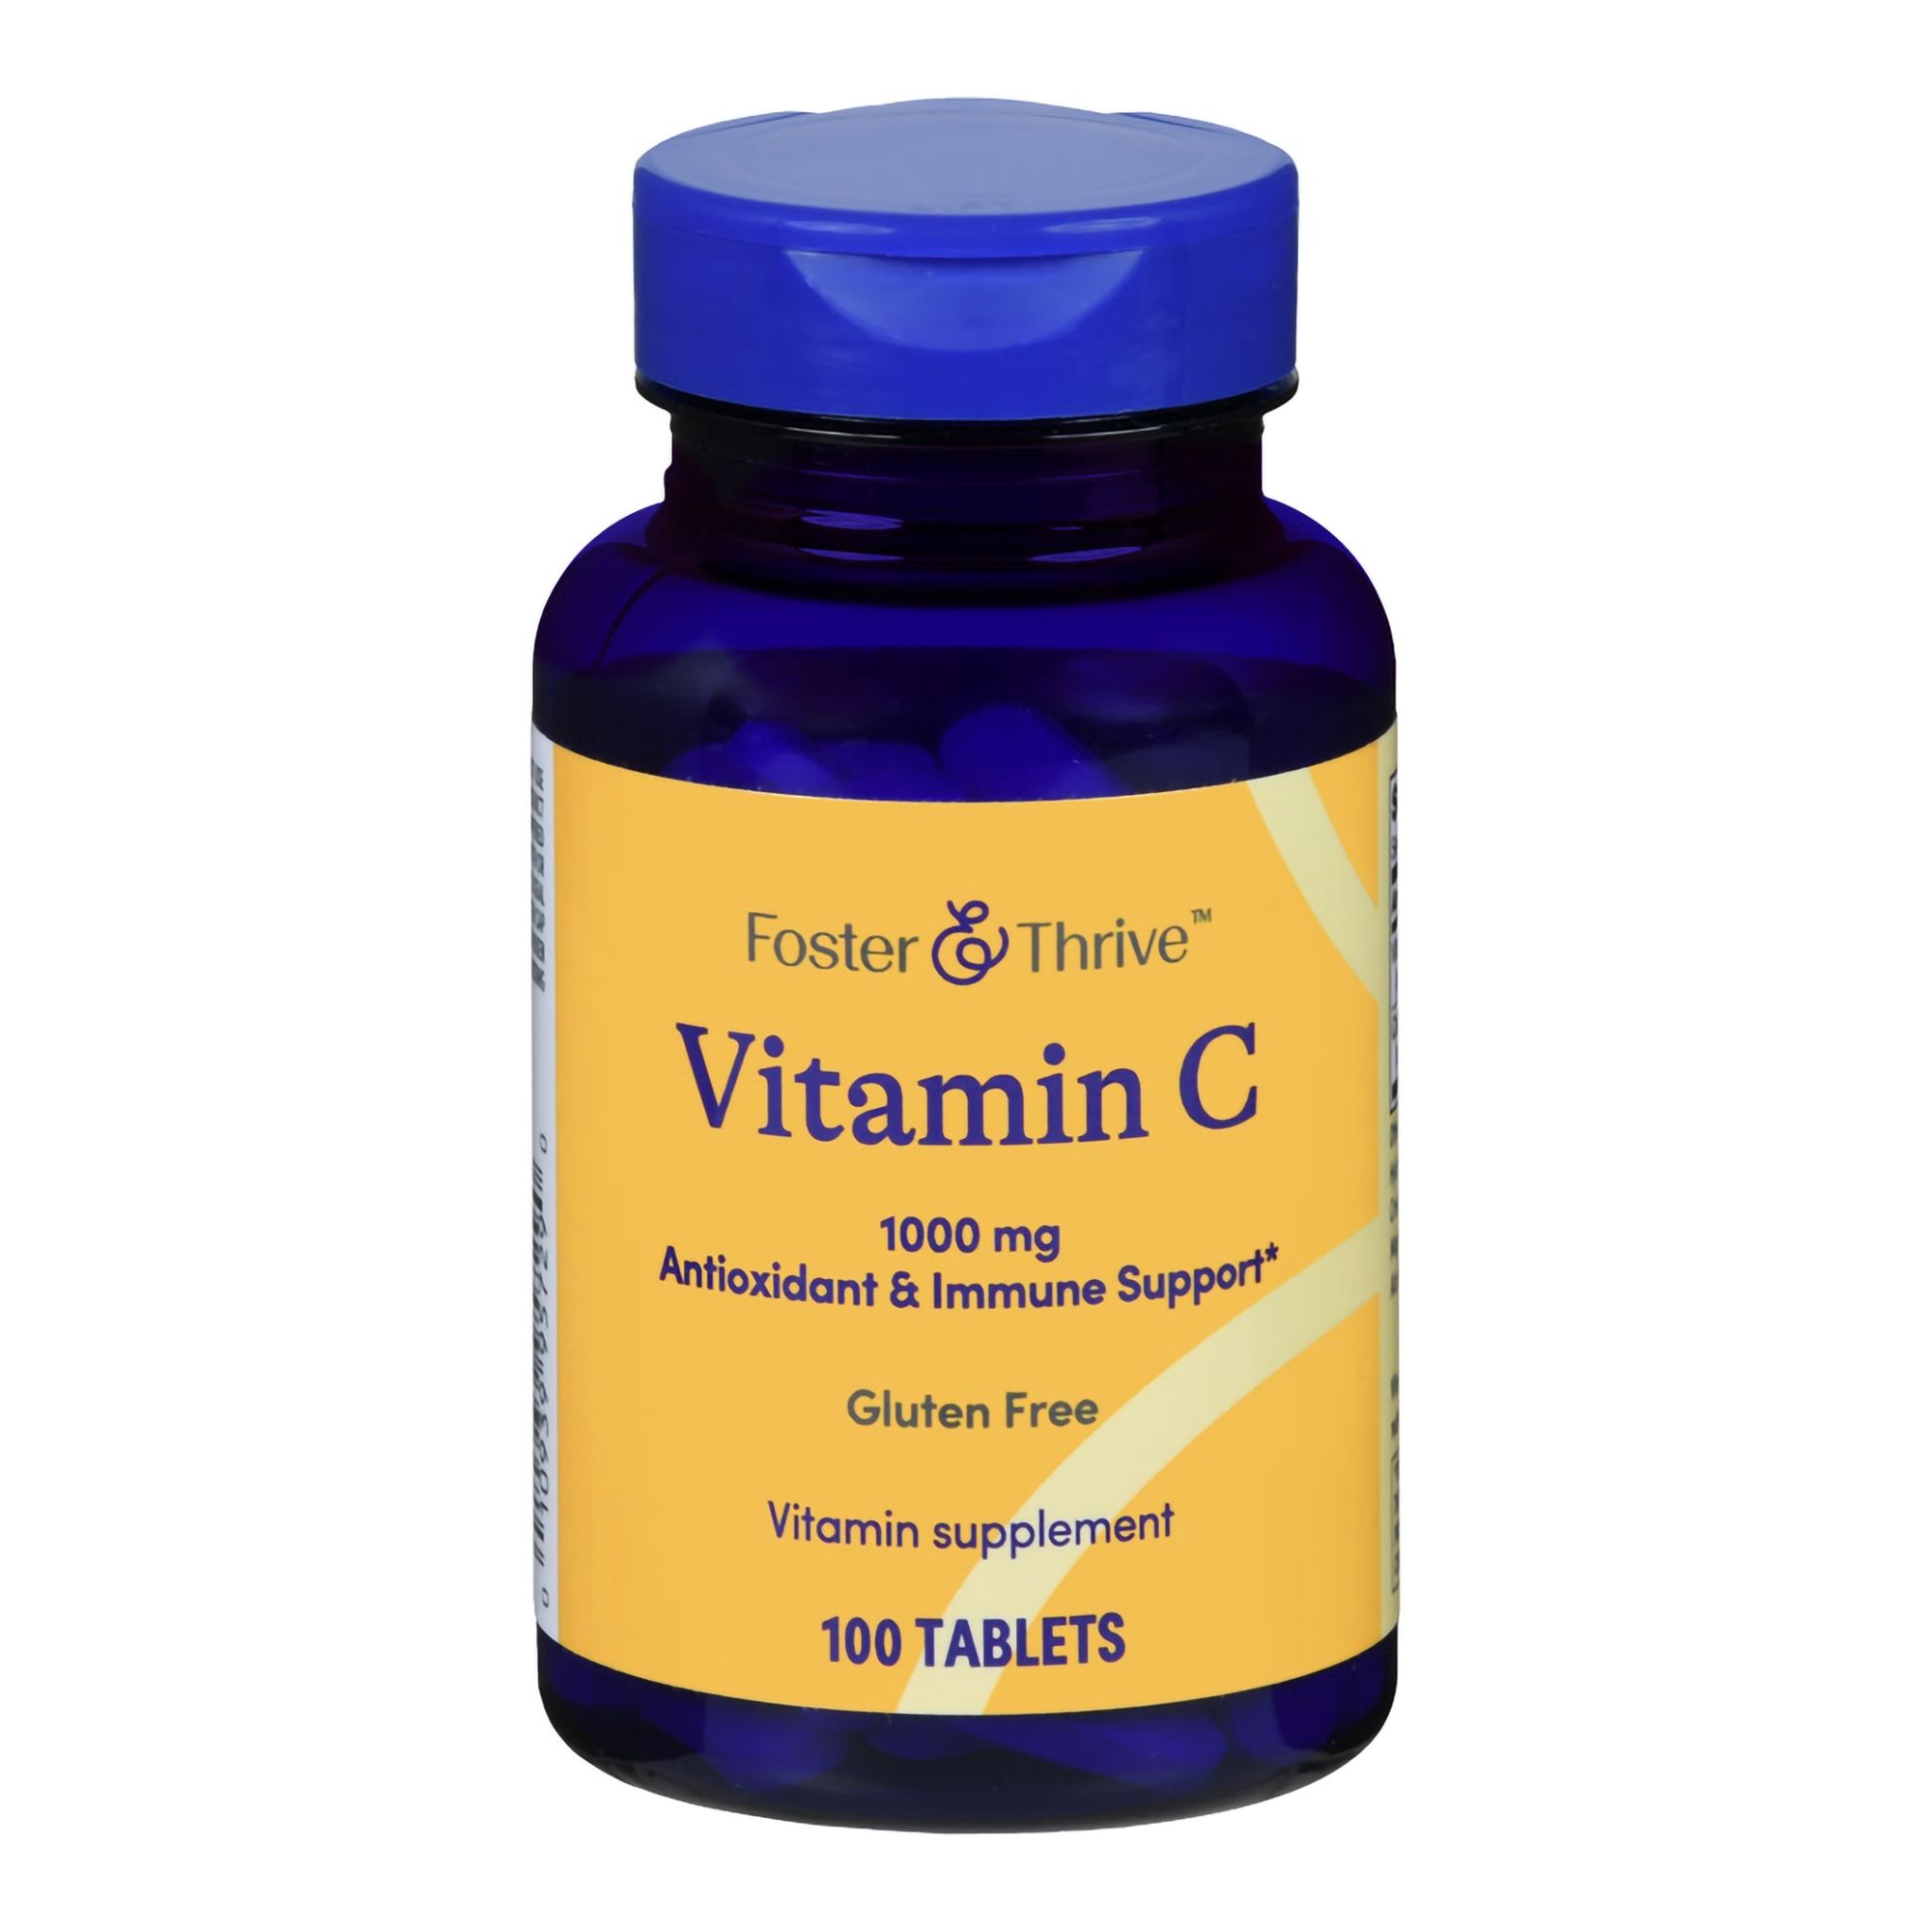 Foster & Thrive Vitamin C Antioxidant & Immune Support Tablets, 1000 mg - 100 ct